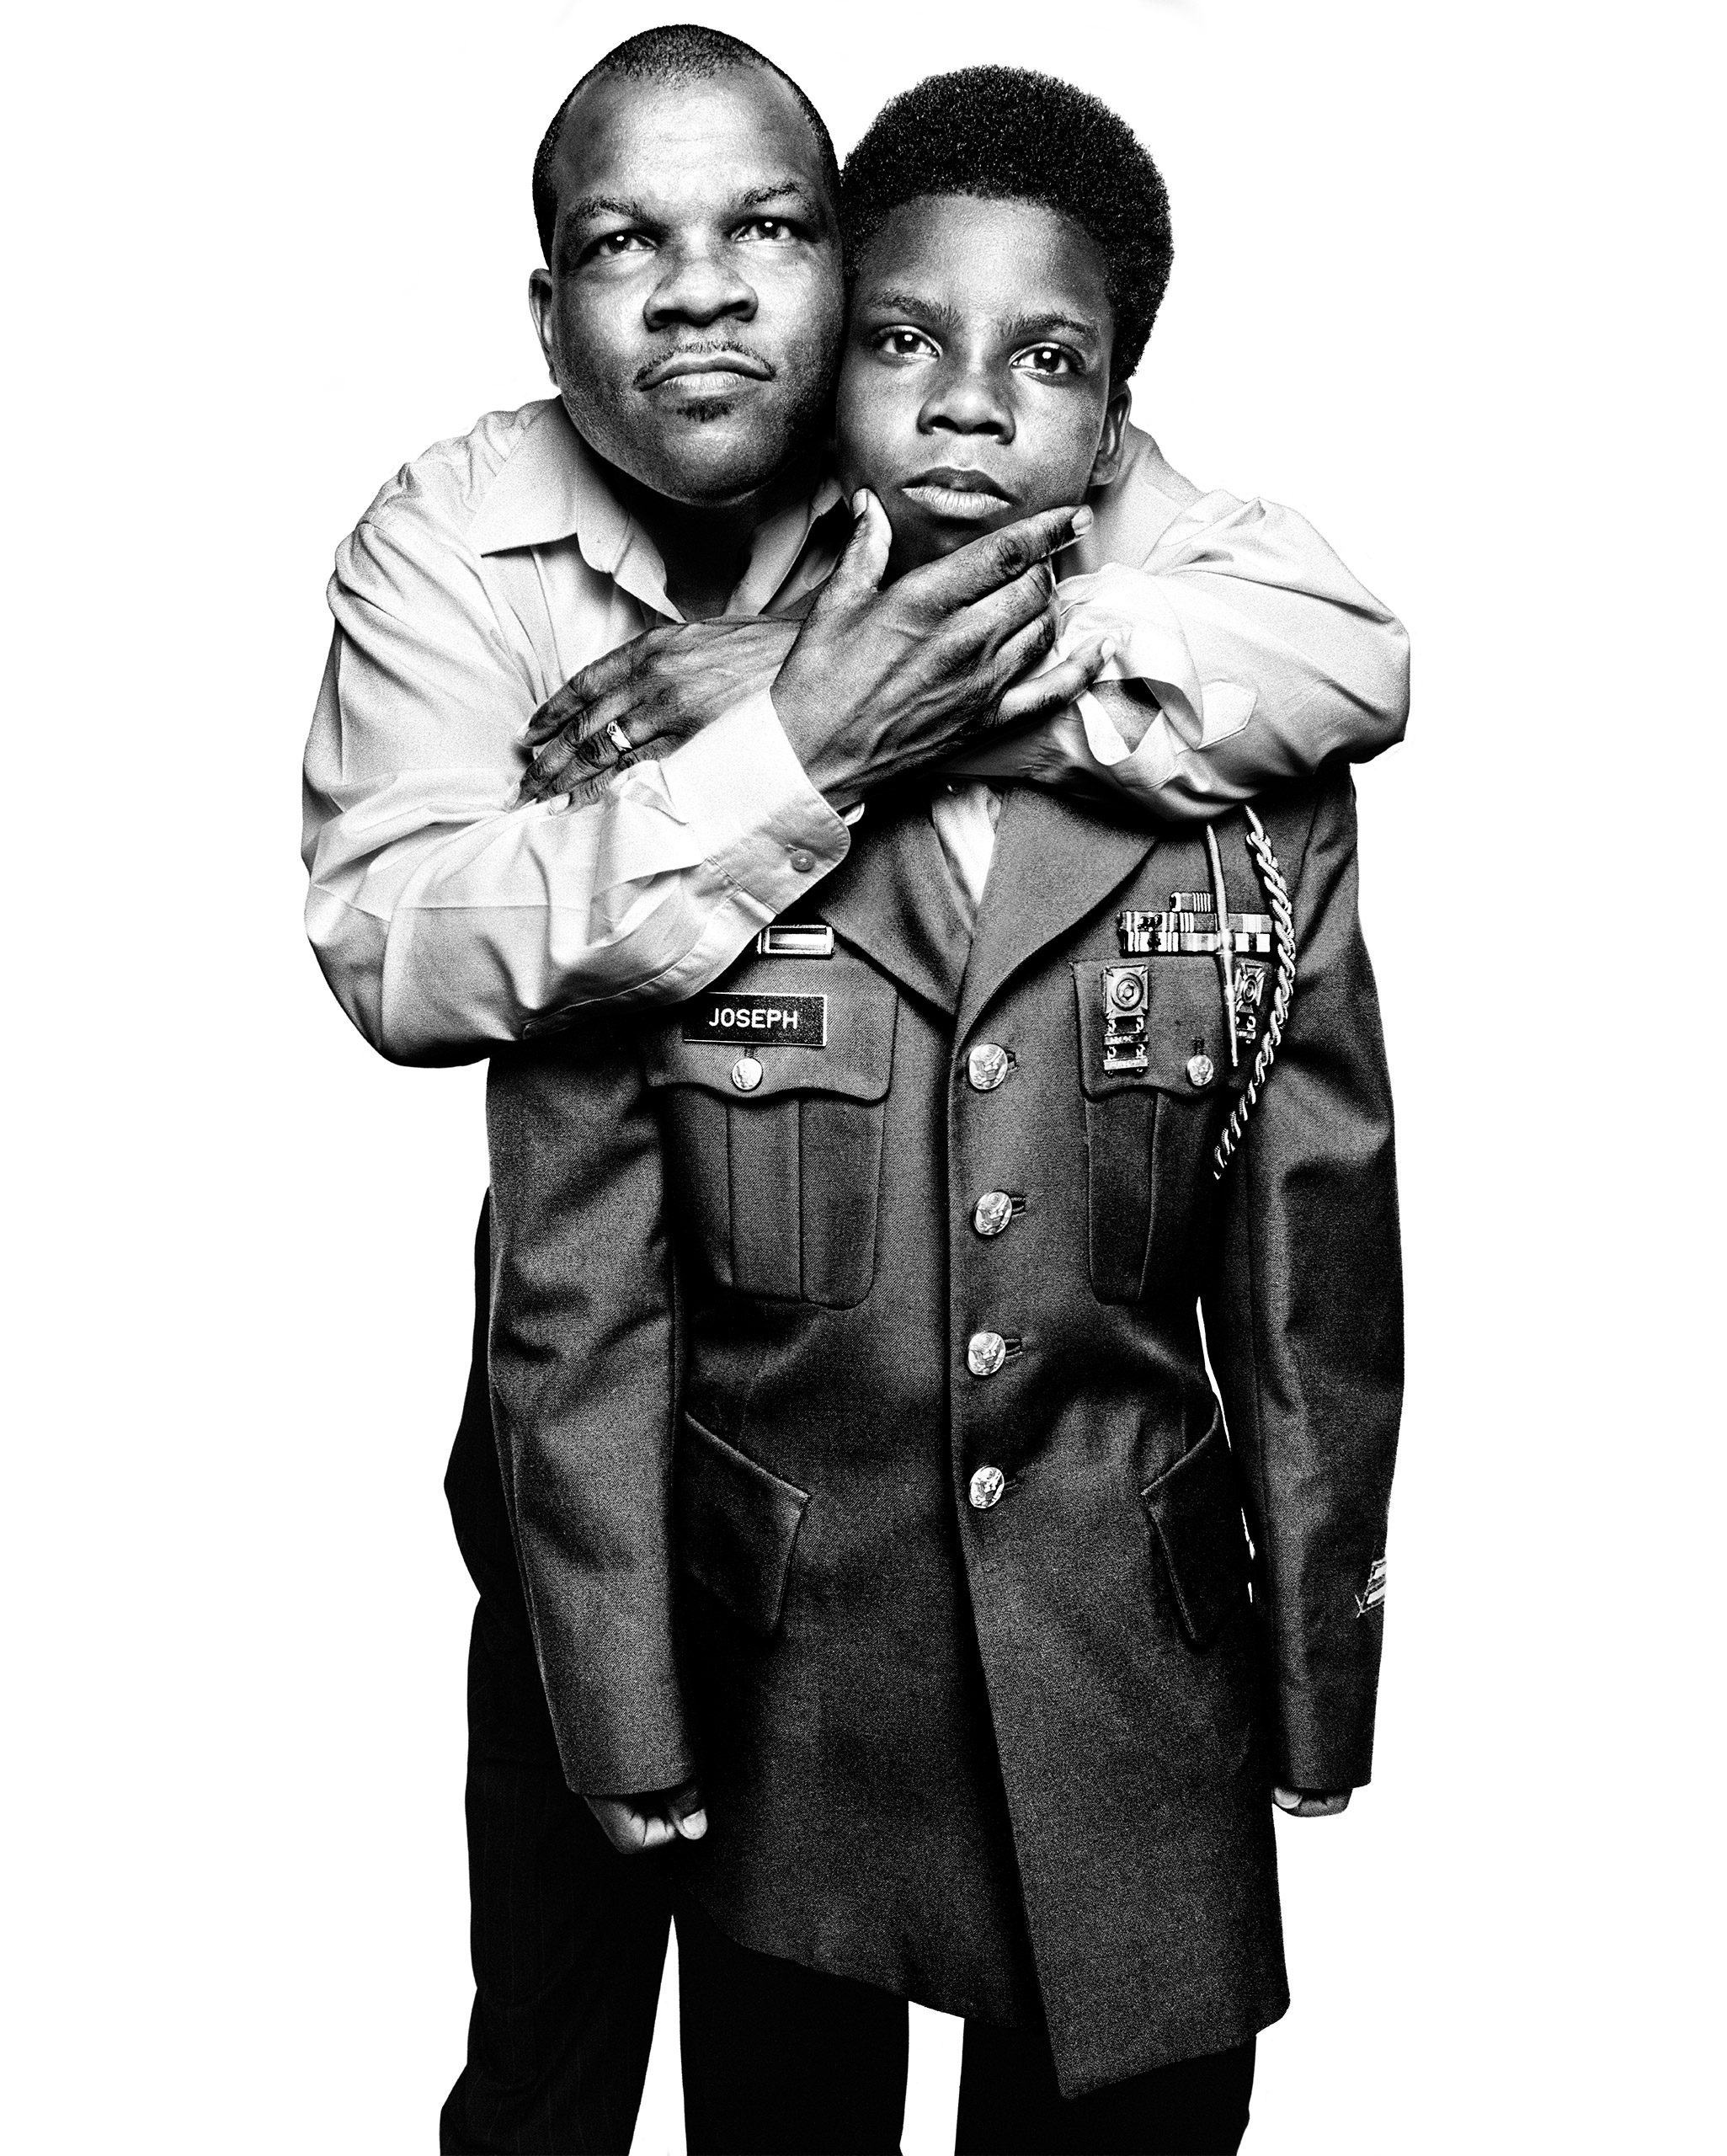 Hilarion Warren Joseph, a decorated veteran of the first Gulf War, with his son,
                              Japeri, who wears the jacket from Joseph’s US Army uniform. Joseph returned
                              from war suffering from post-traumatic stress disorder and attempted suicide
                              three times. New York City, 2013.